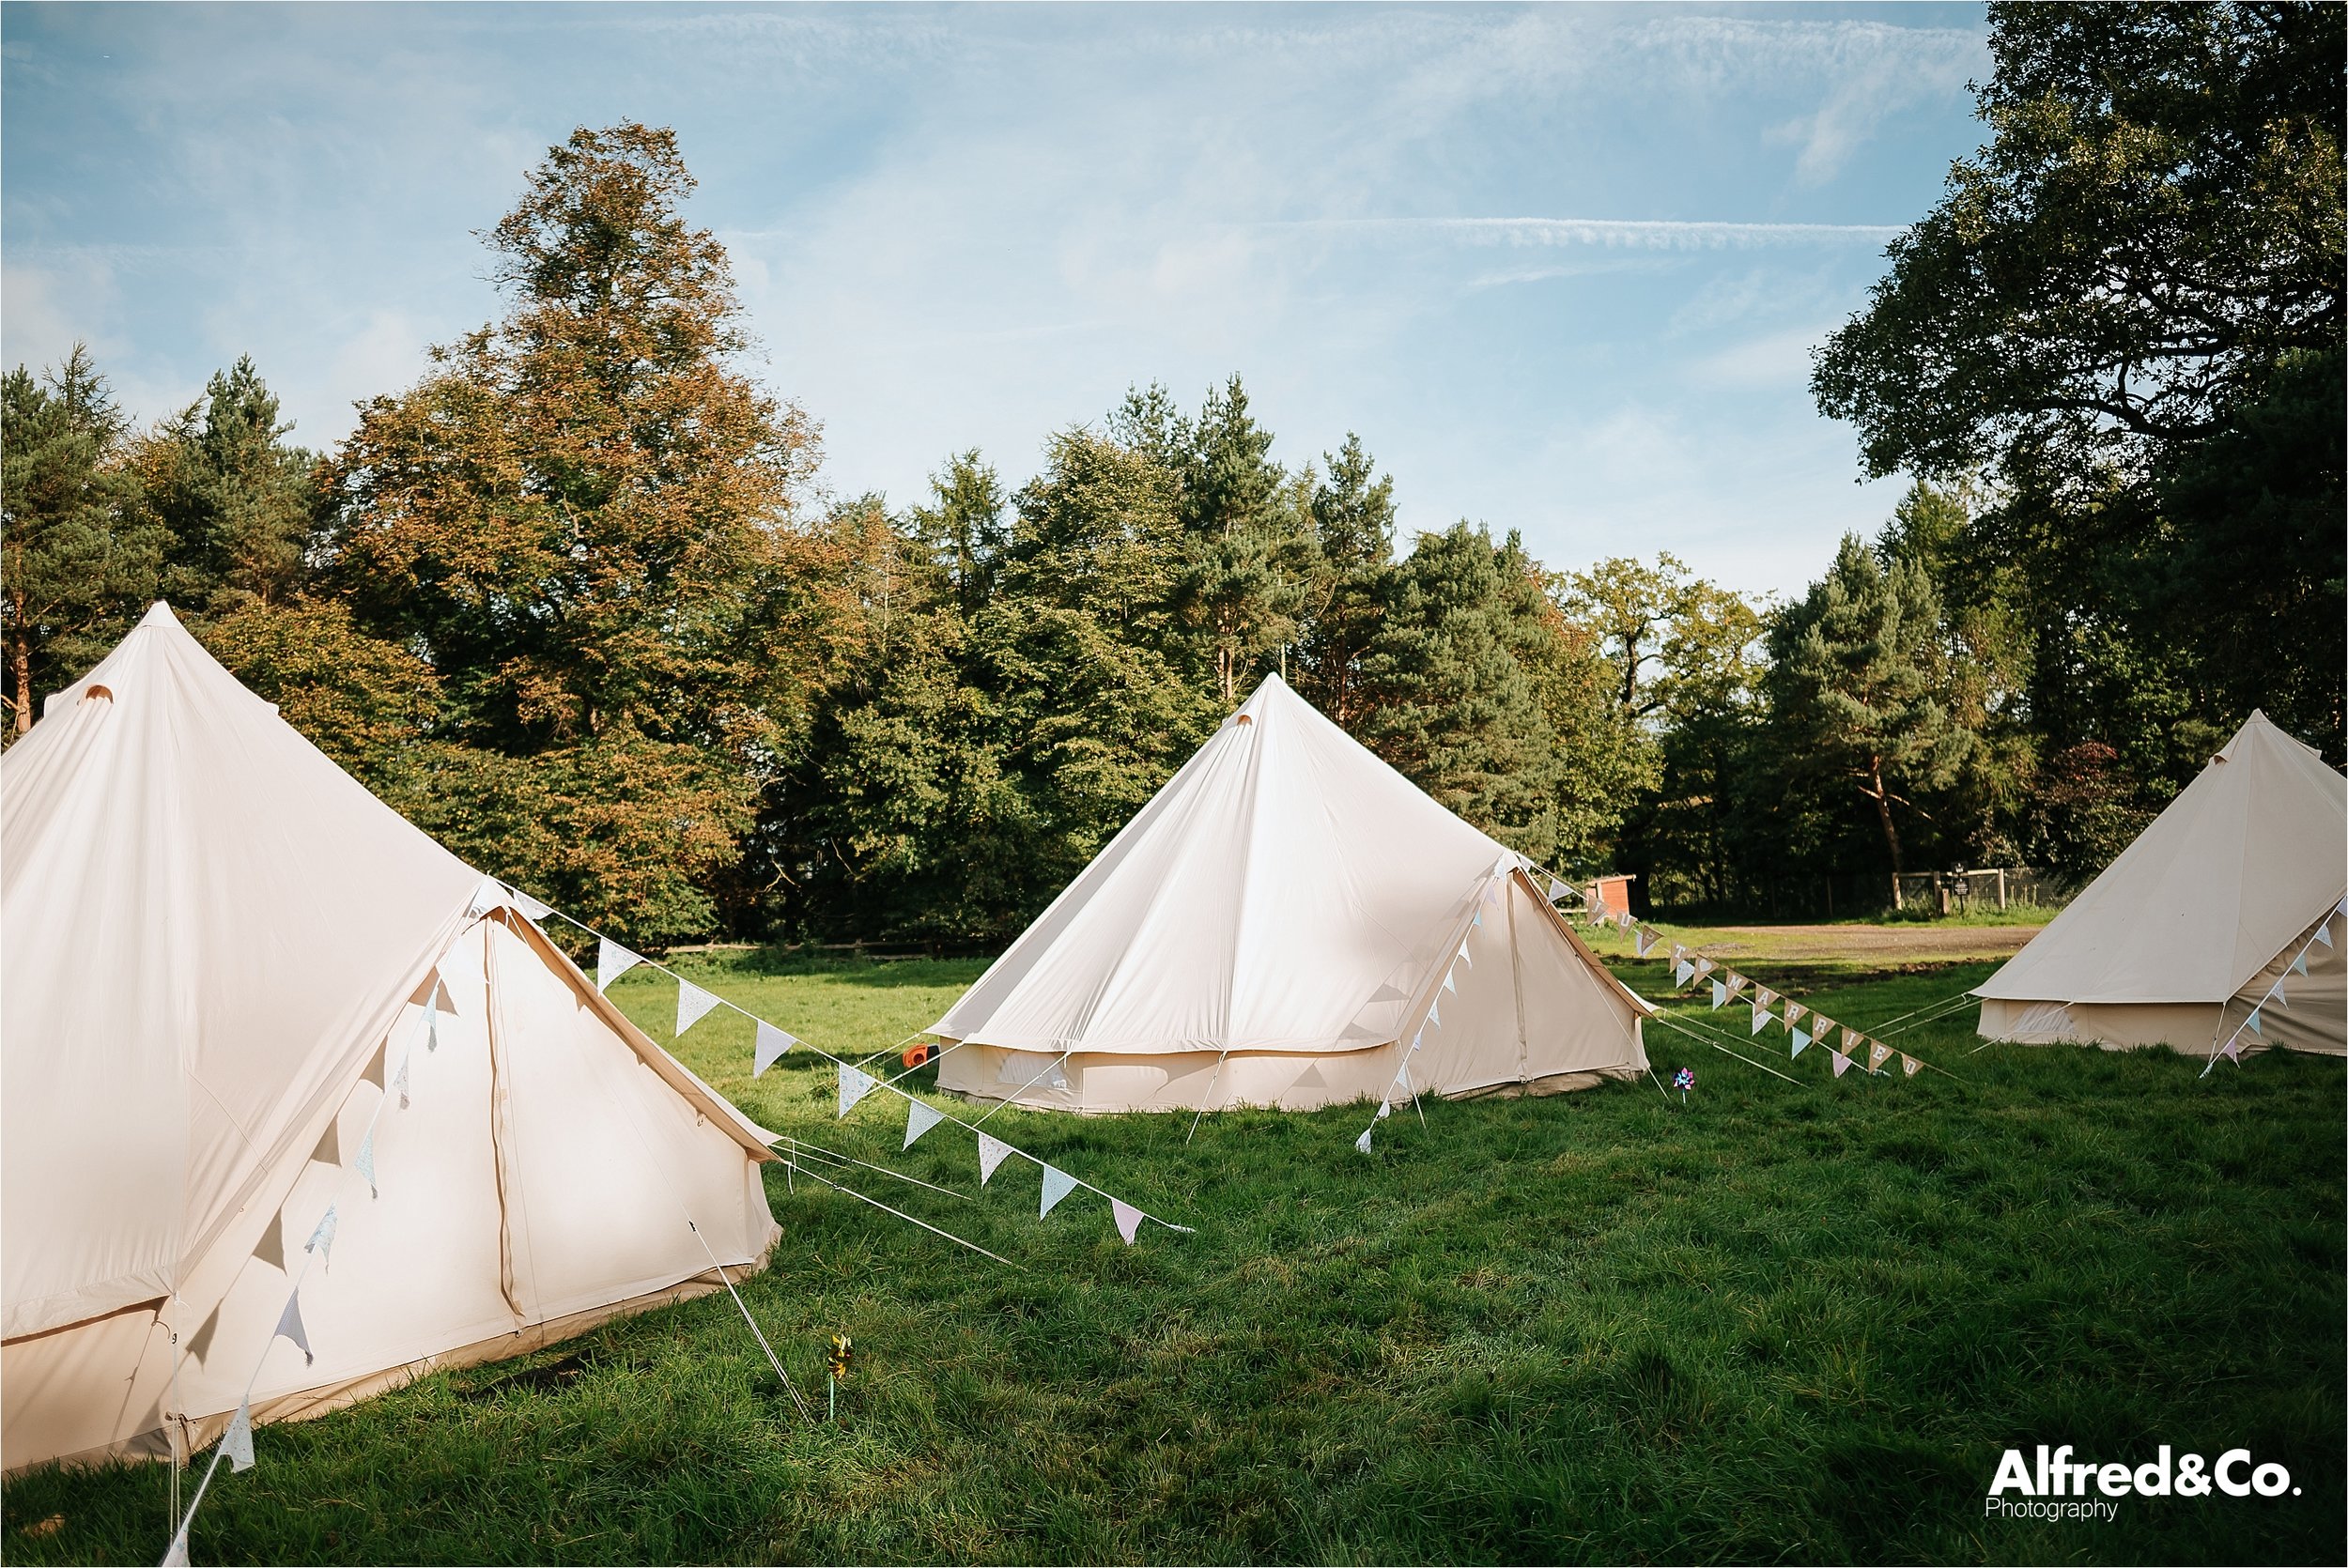 wedding belles camping yurts at dorfold hall in cheshire 